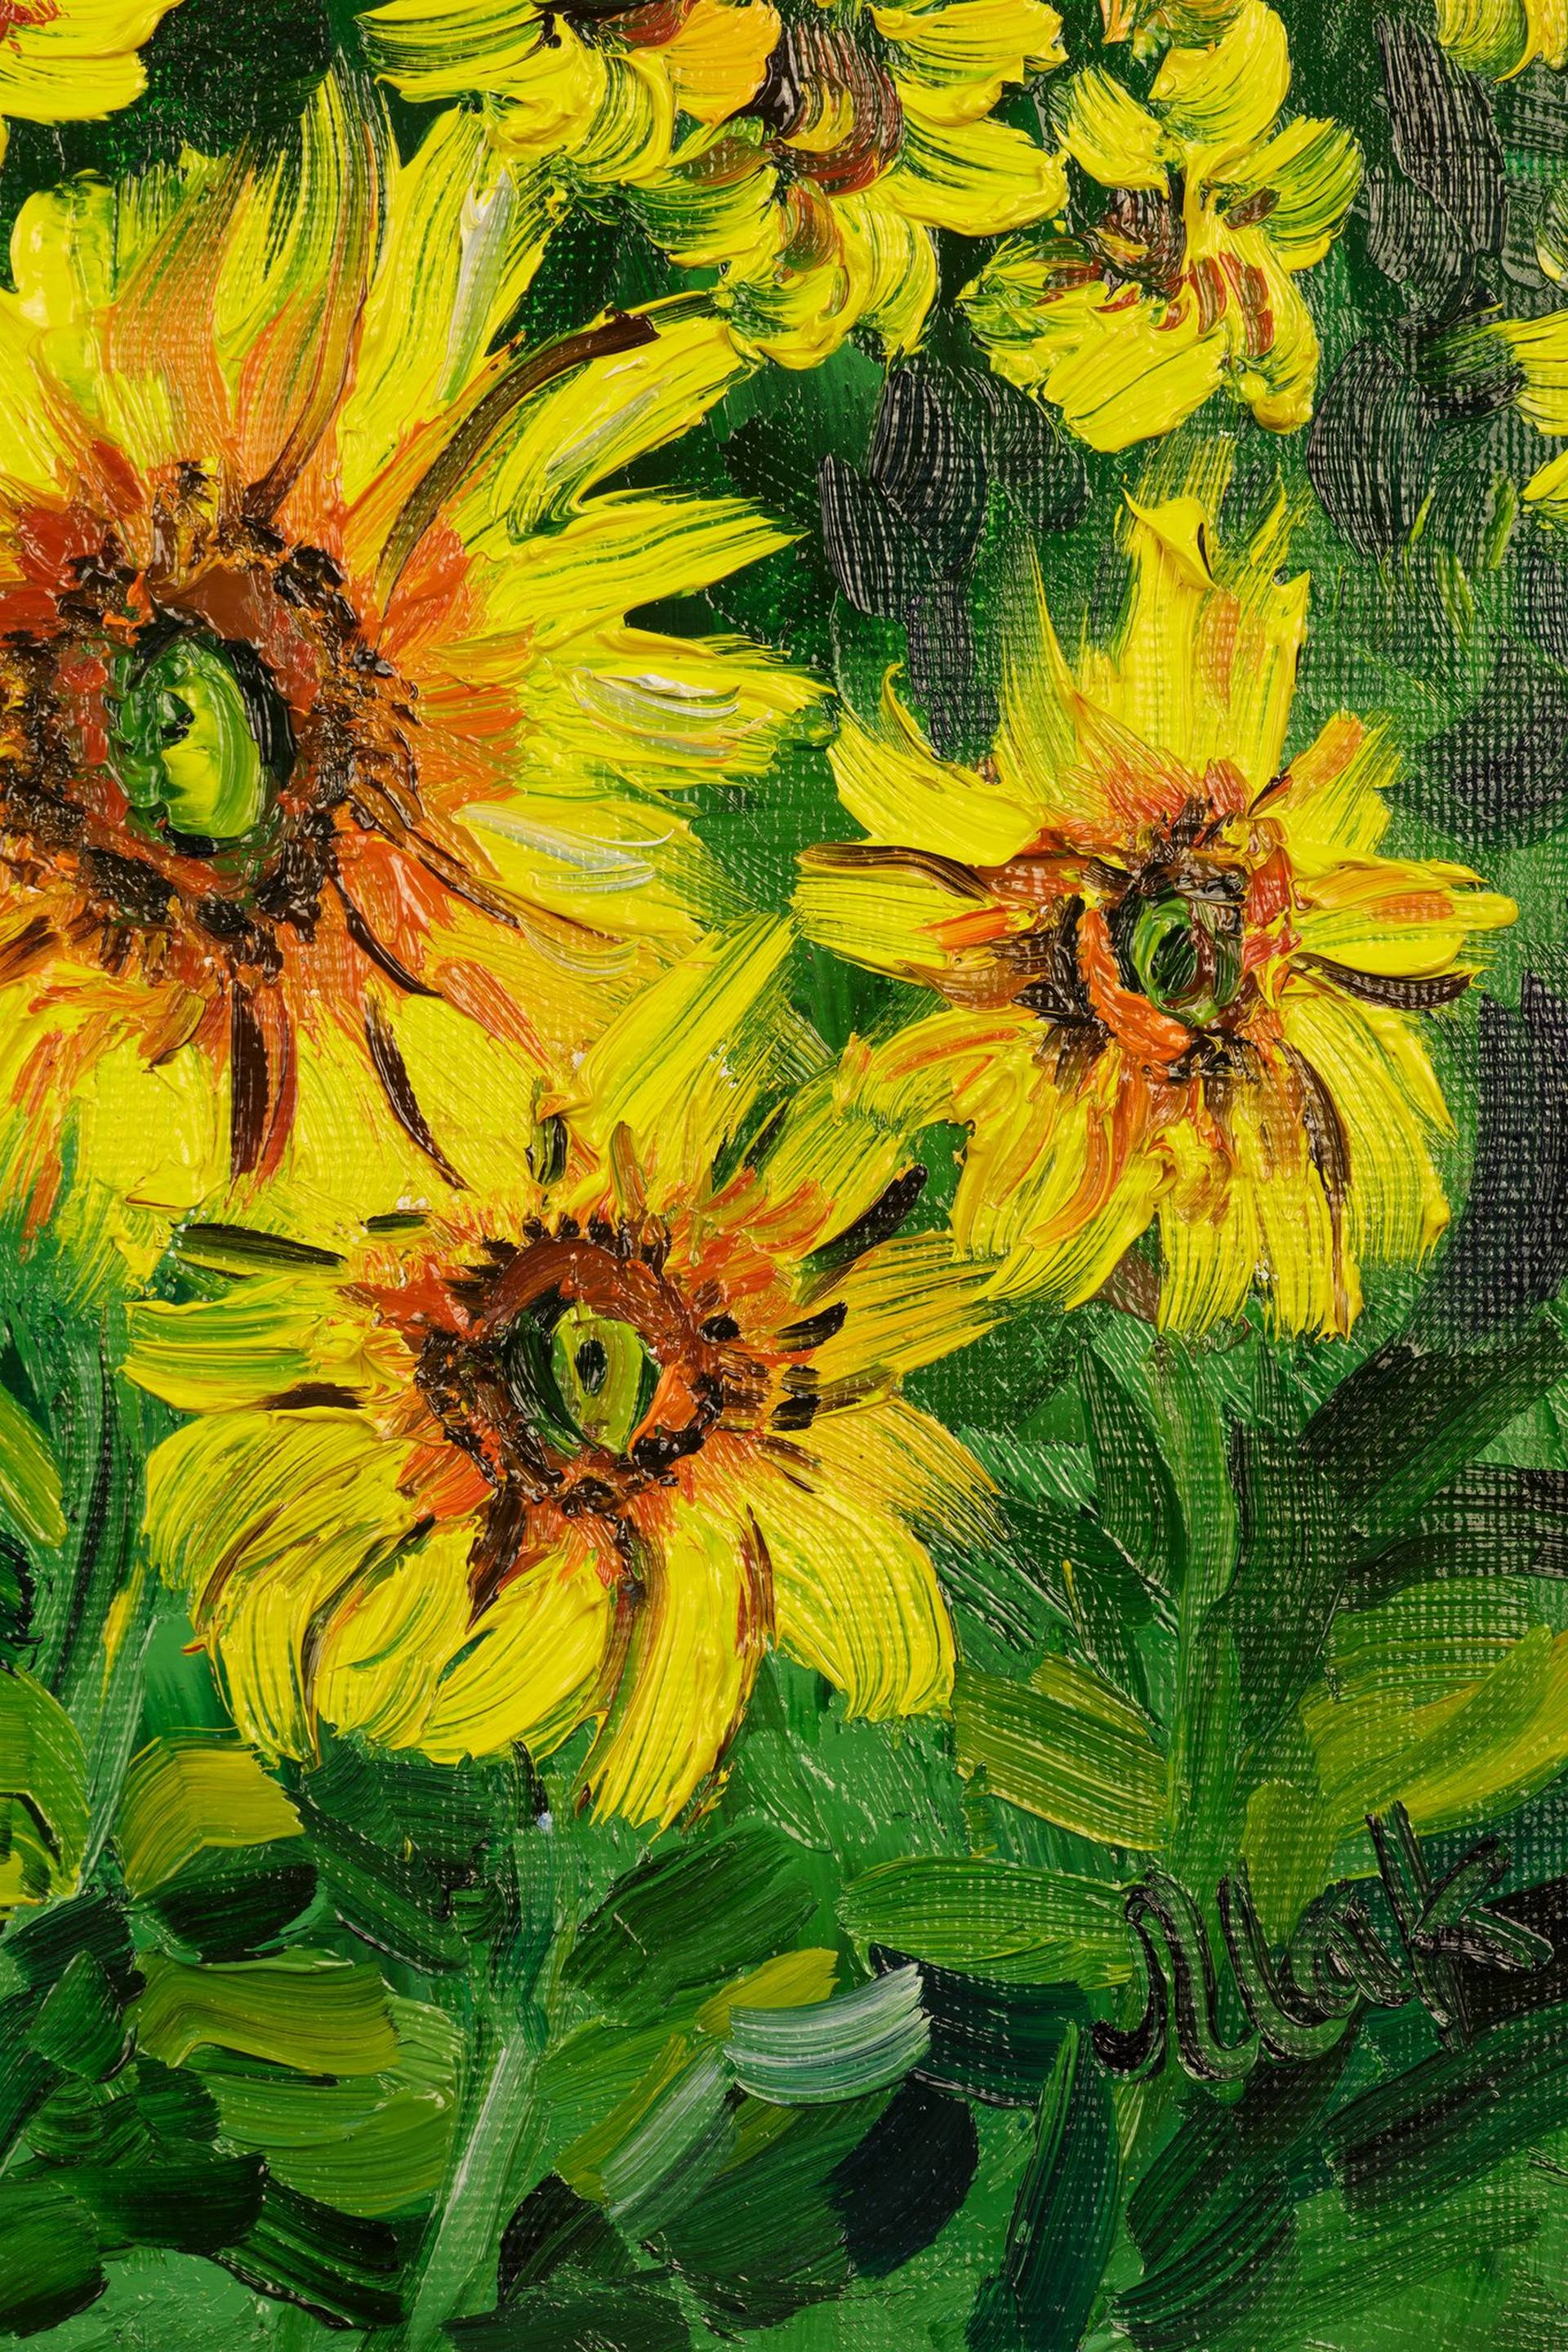 Sunflower Painting Flower Original Art Floral oil Painting  Impasto Art Floral 8 by 6 by Nataly Mak